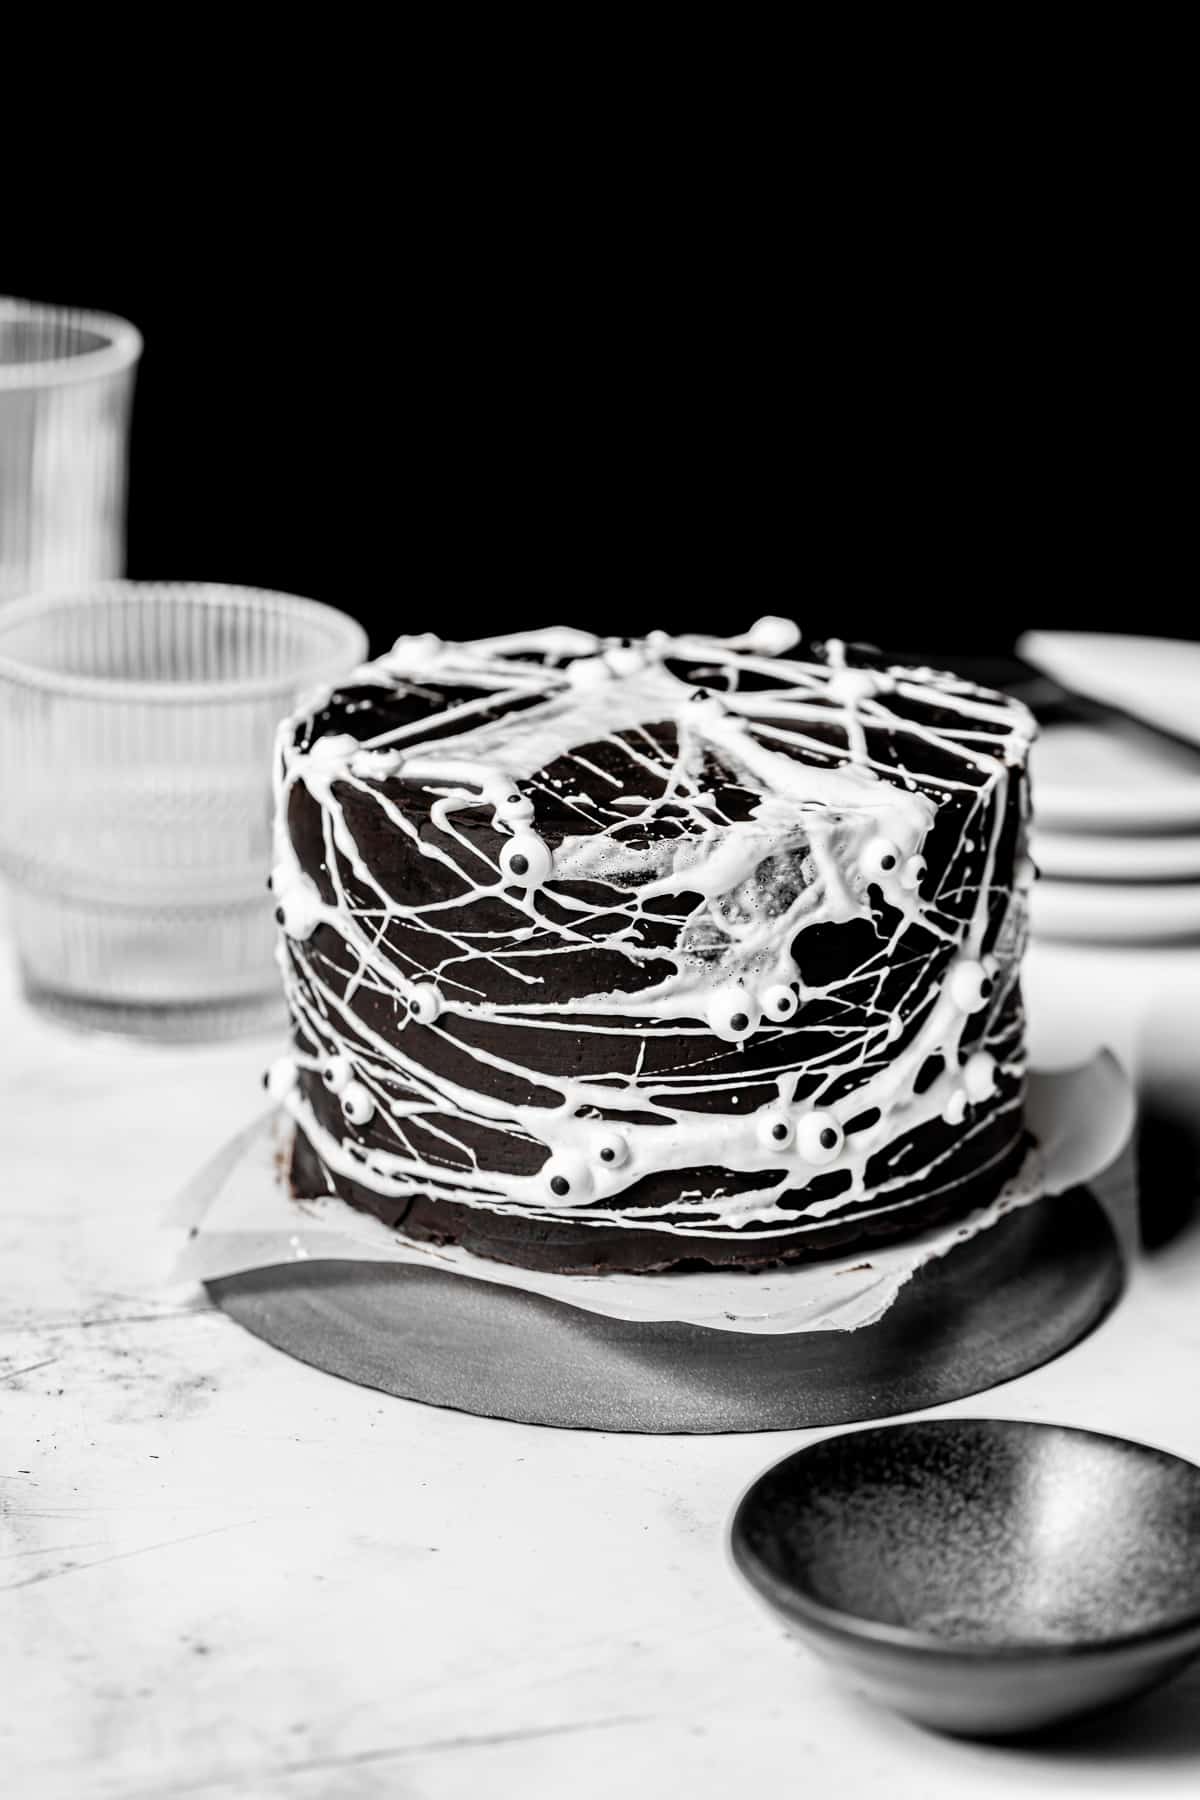 decorated spider web cake on plate.